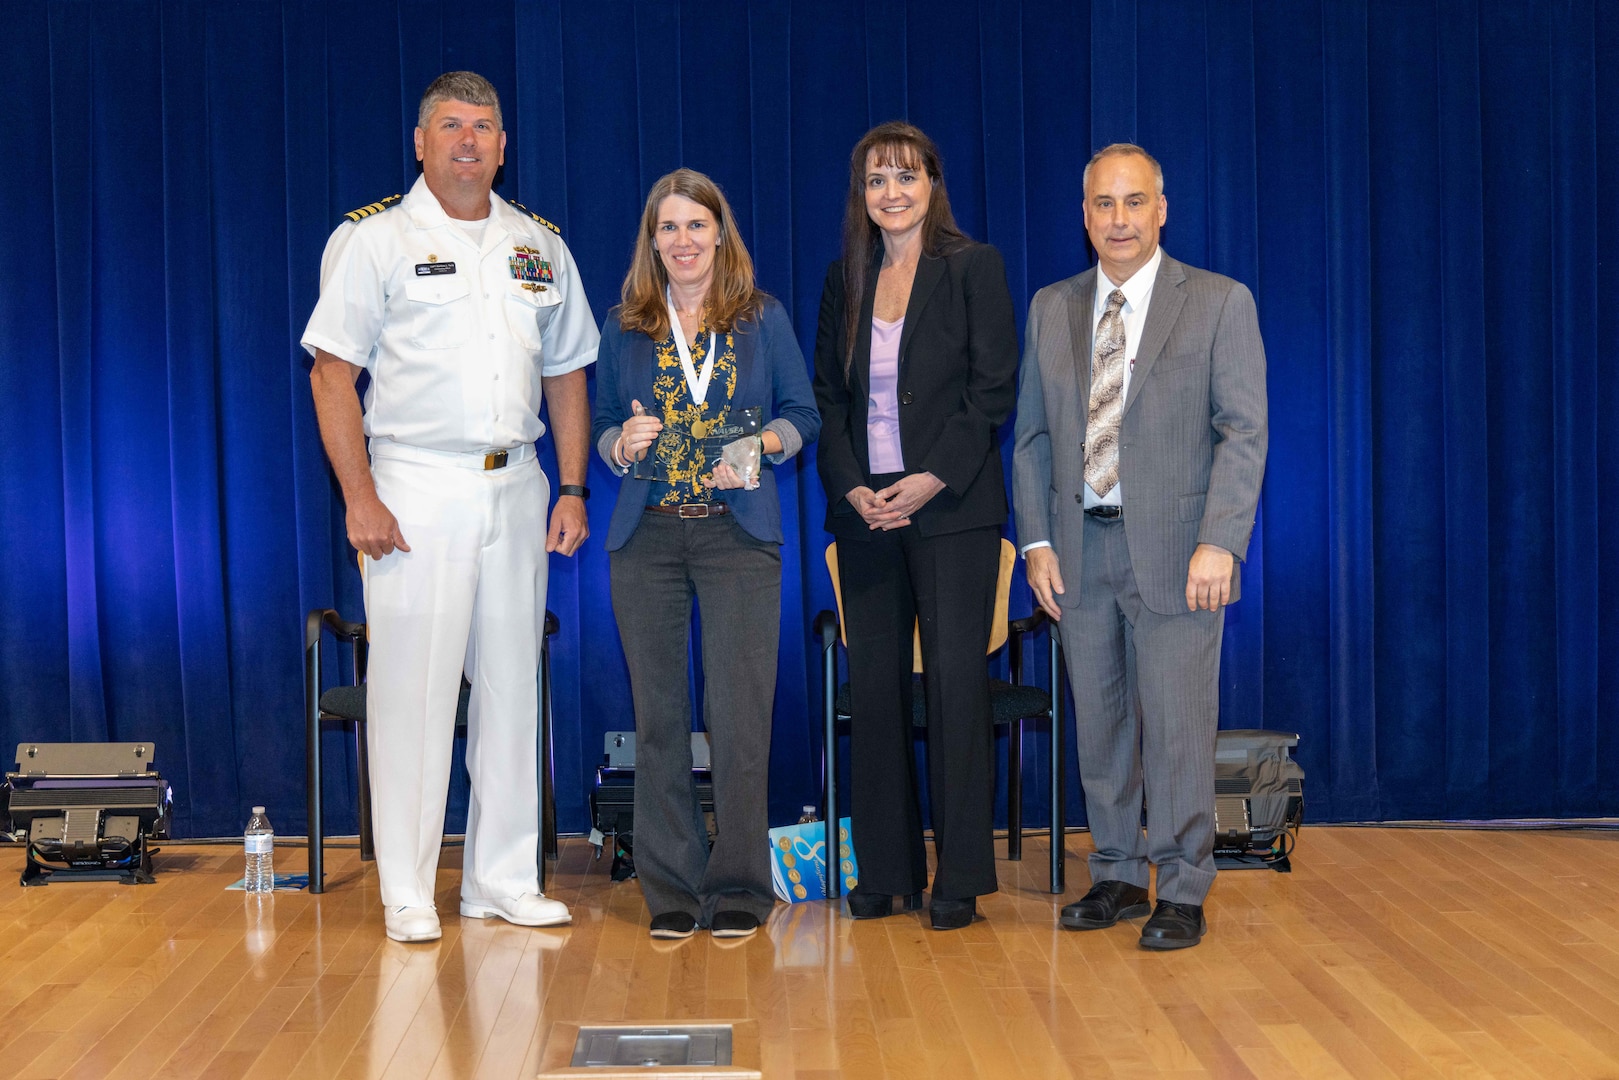 Naval Surface Warfare Center, Carderock Division's Commanding Officer Capt. Matthew Tardy (left), Technical Director Larry Tarasek (right) and Tamar Gallagher (second to right), the Corporate Operations Department Head, present the Rear Adm. Grace M. Hopper Award for Excellence in Organizational Support to Executive Assistant Jessica Williamson (second to left) during Carderock's Magnificent Eight Award ceremony in West Bethesda, Md., on June 13. (U.S. Navy photo by Aaron Thomas)